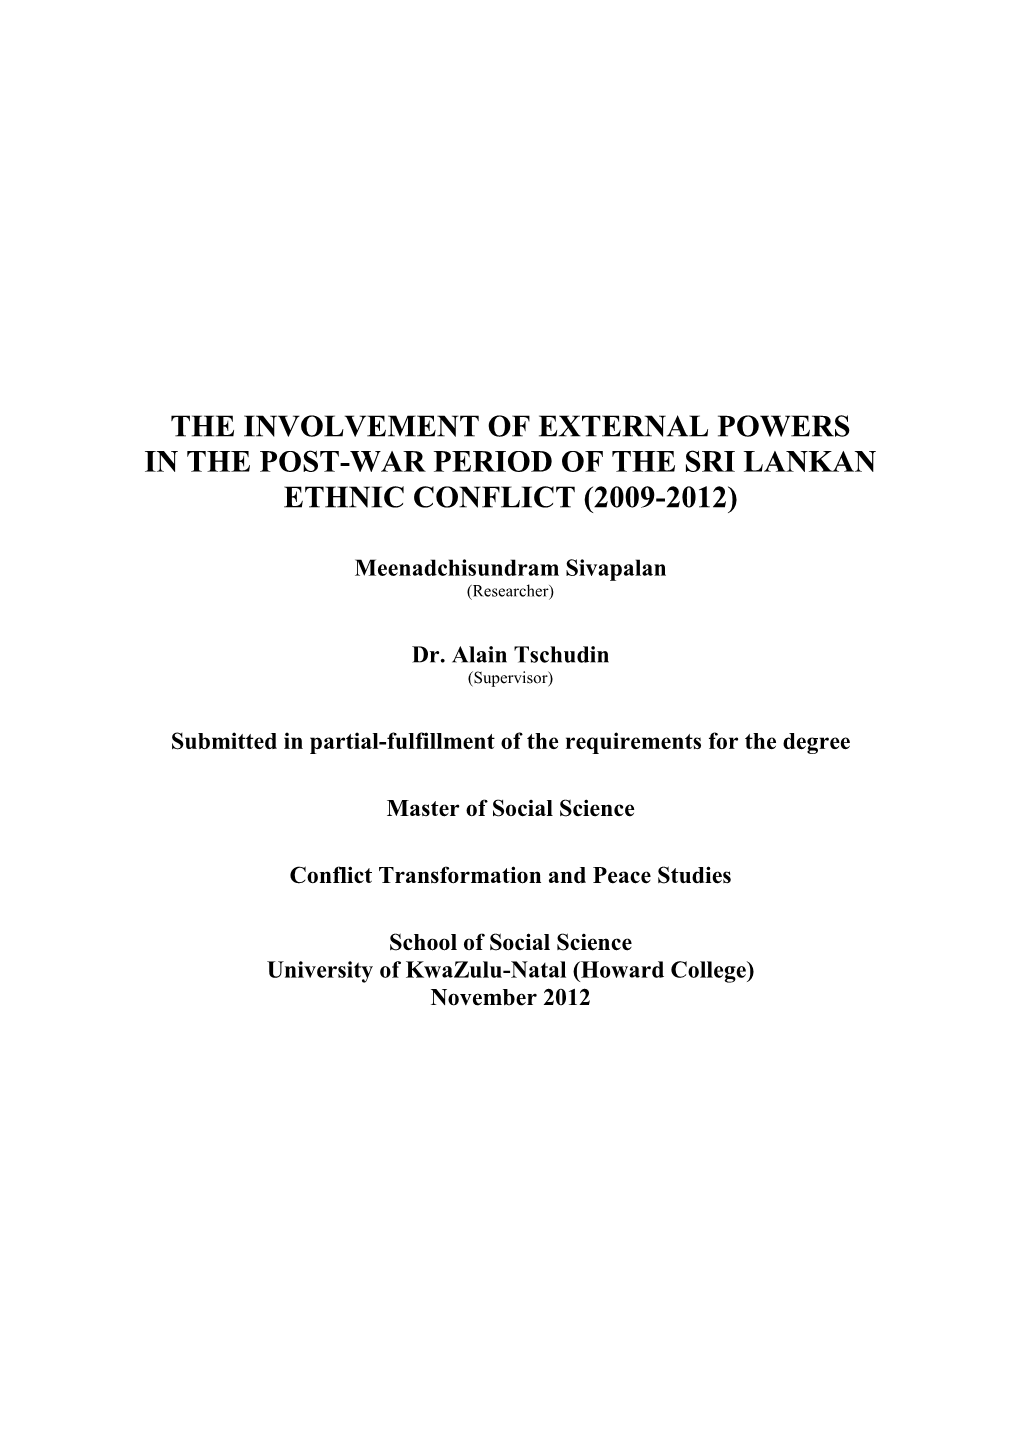 The Involvement of External Powers in the Post-War Period of the Sri Lankan Ethnic Conflict (2009-2012)